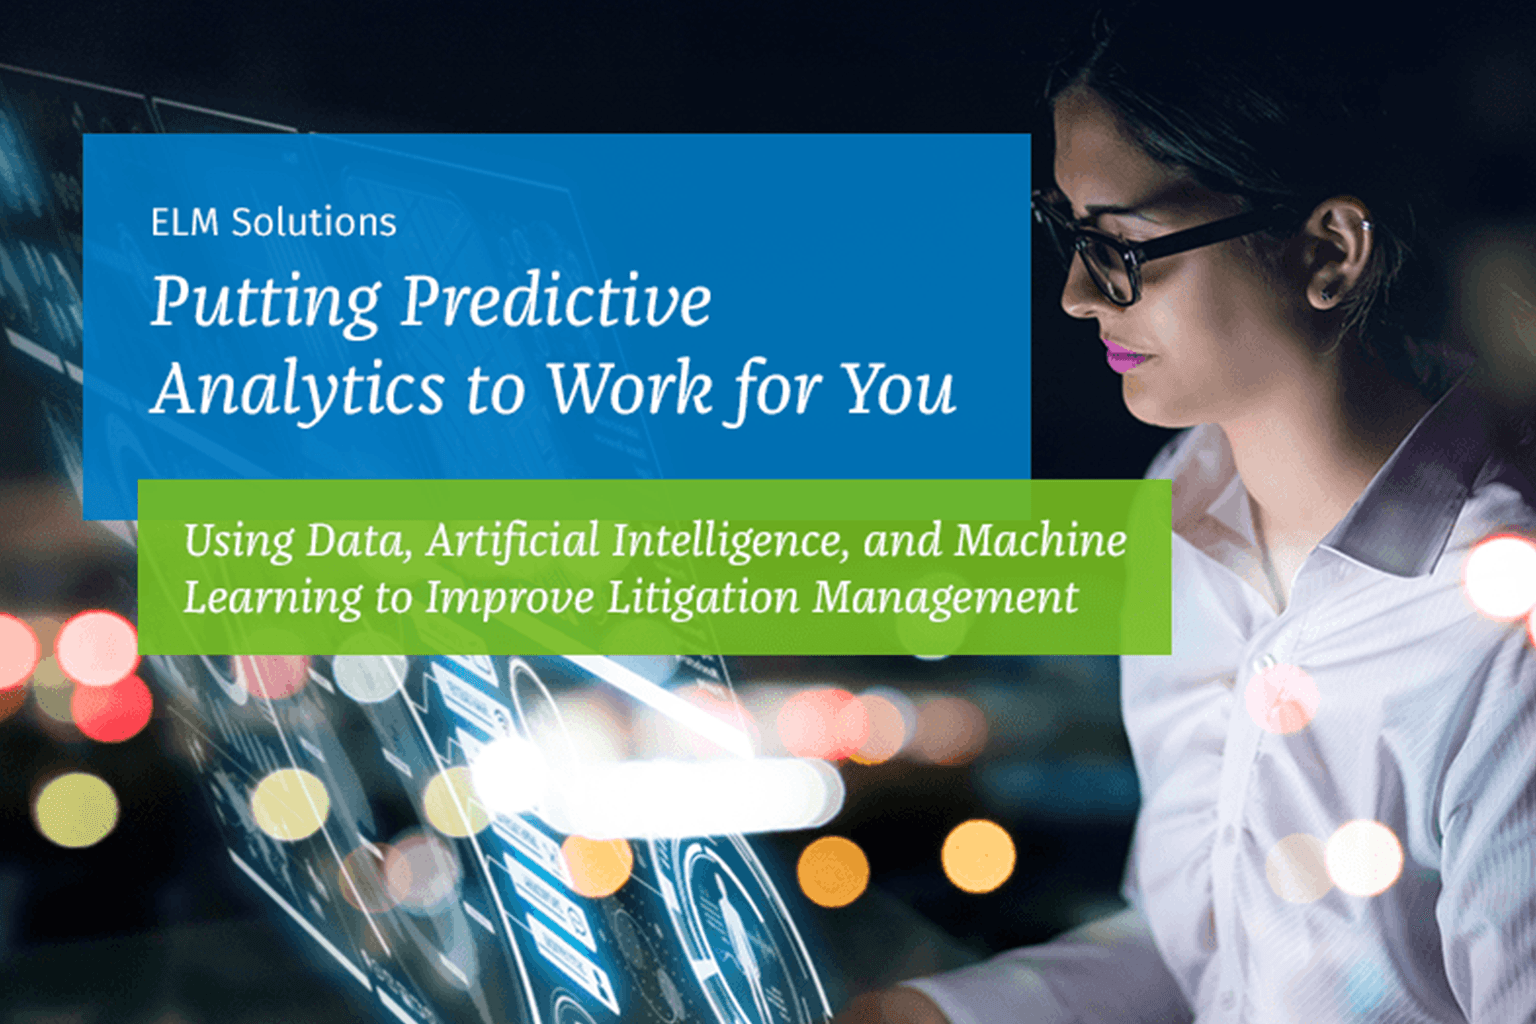 eBook: Putting Predictive Analytics to Work for You